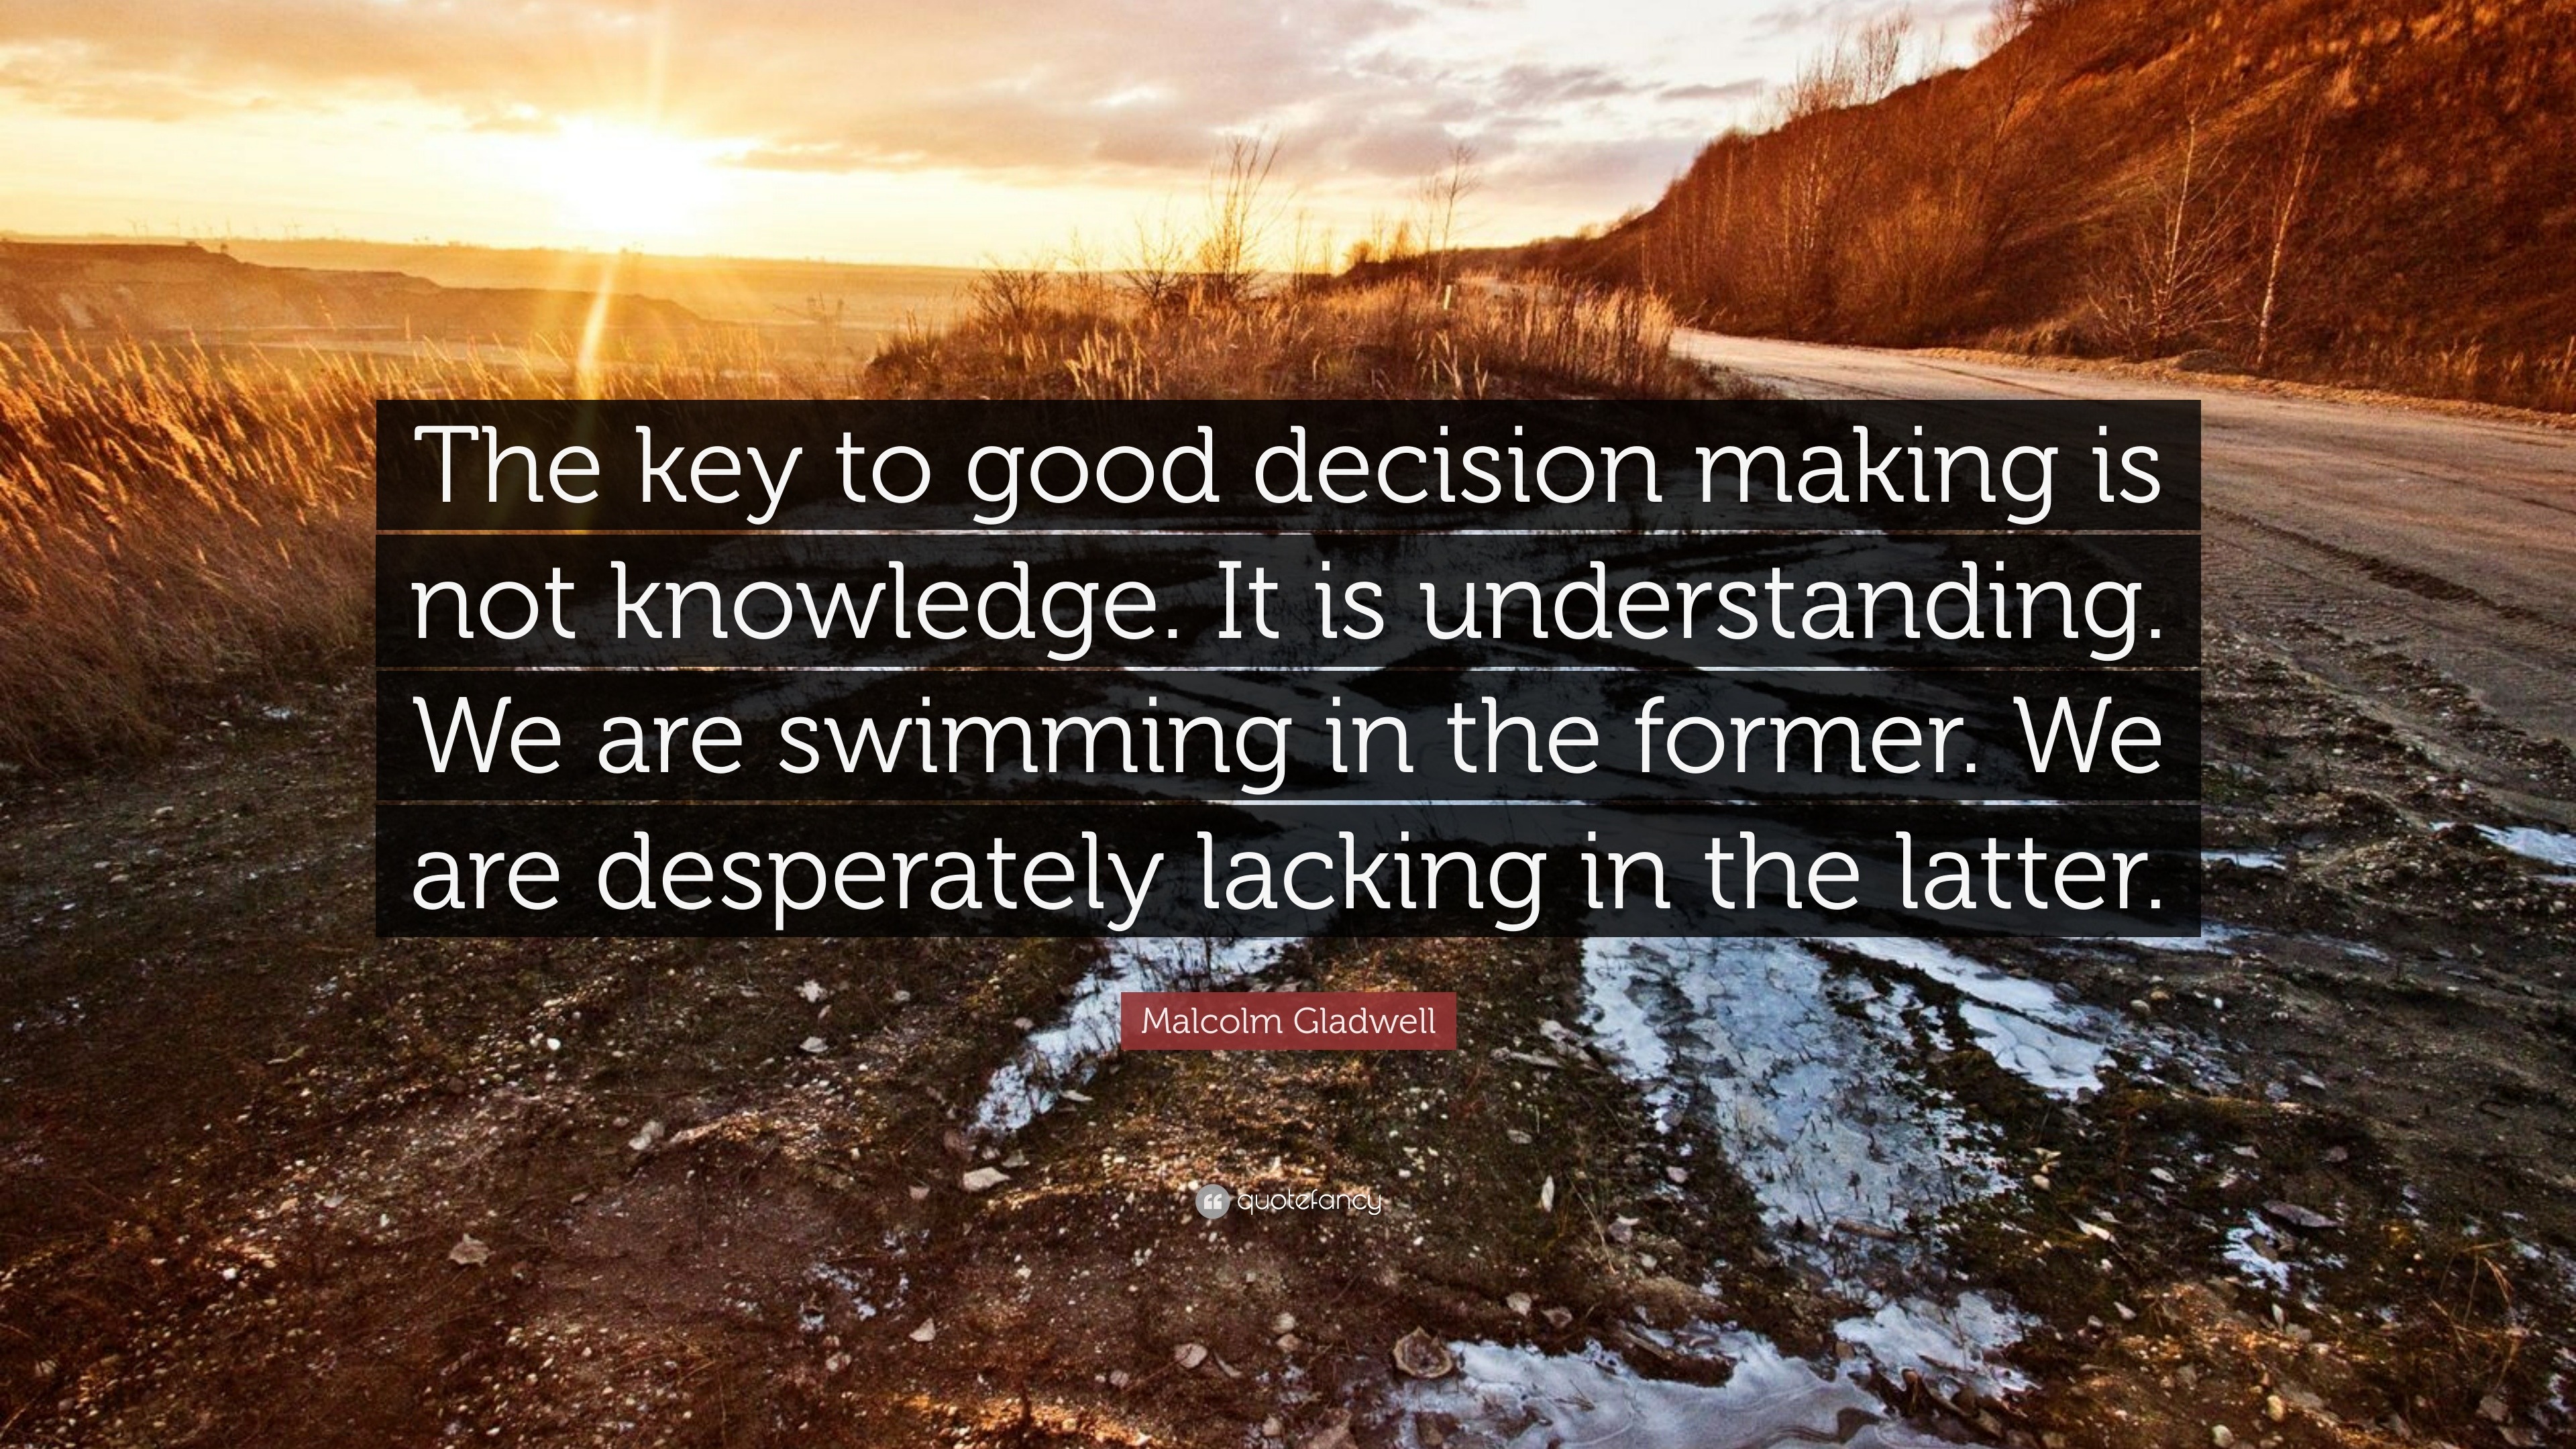 Malcolm Gladwell Quote “The key to good decision making is not knowledge It